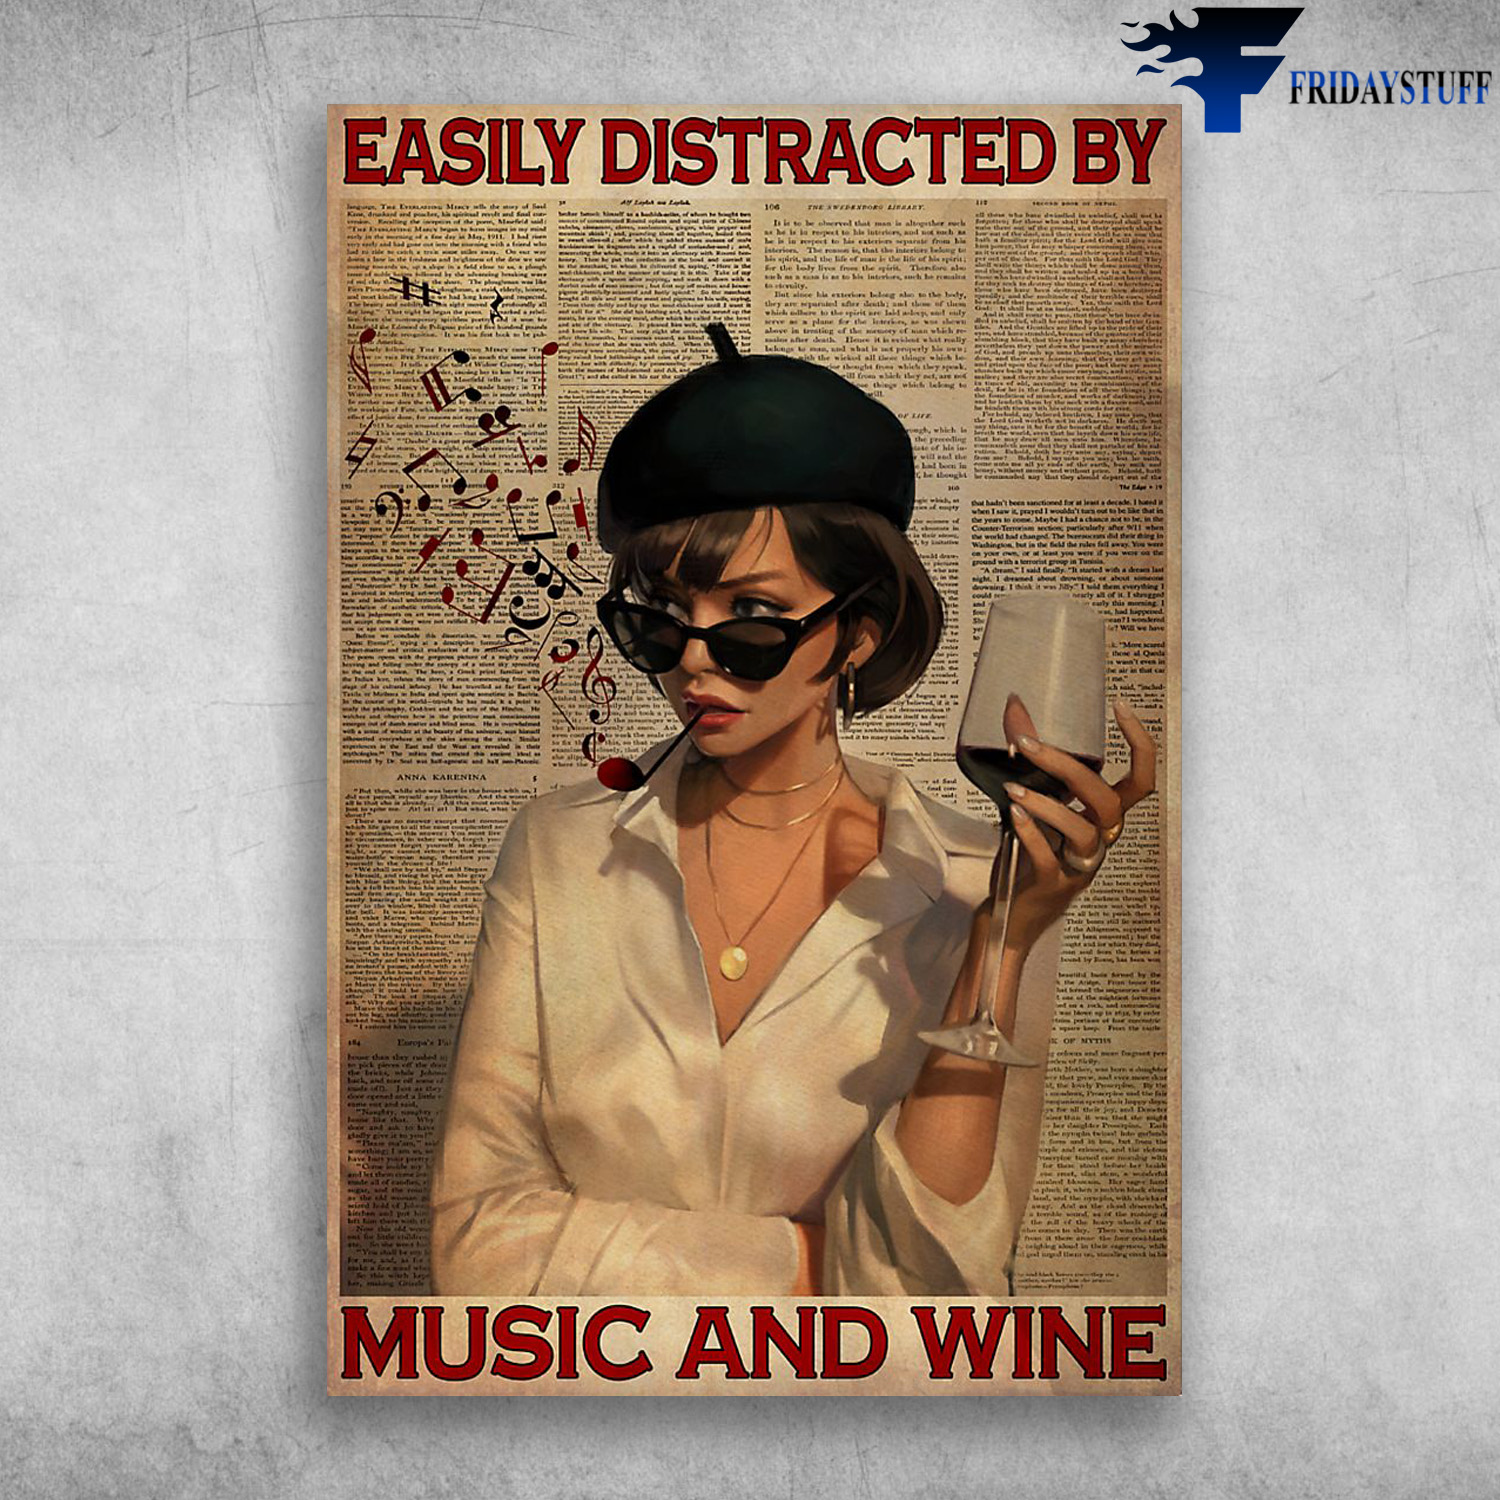 Girl Smoking Music And Wine - Easily Distracted By Music And Wine